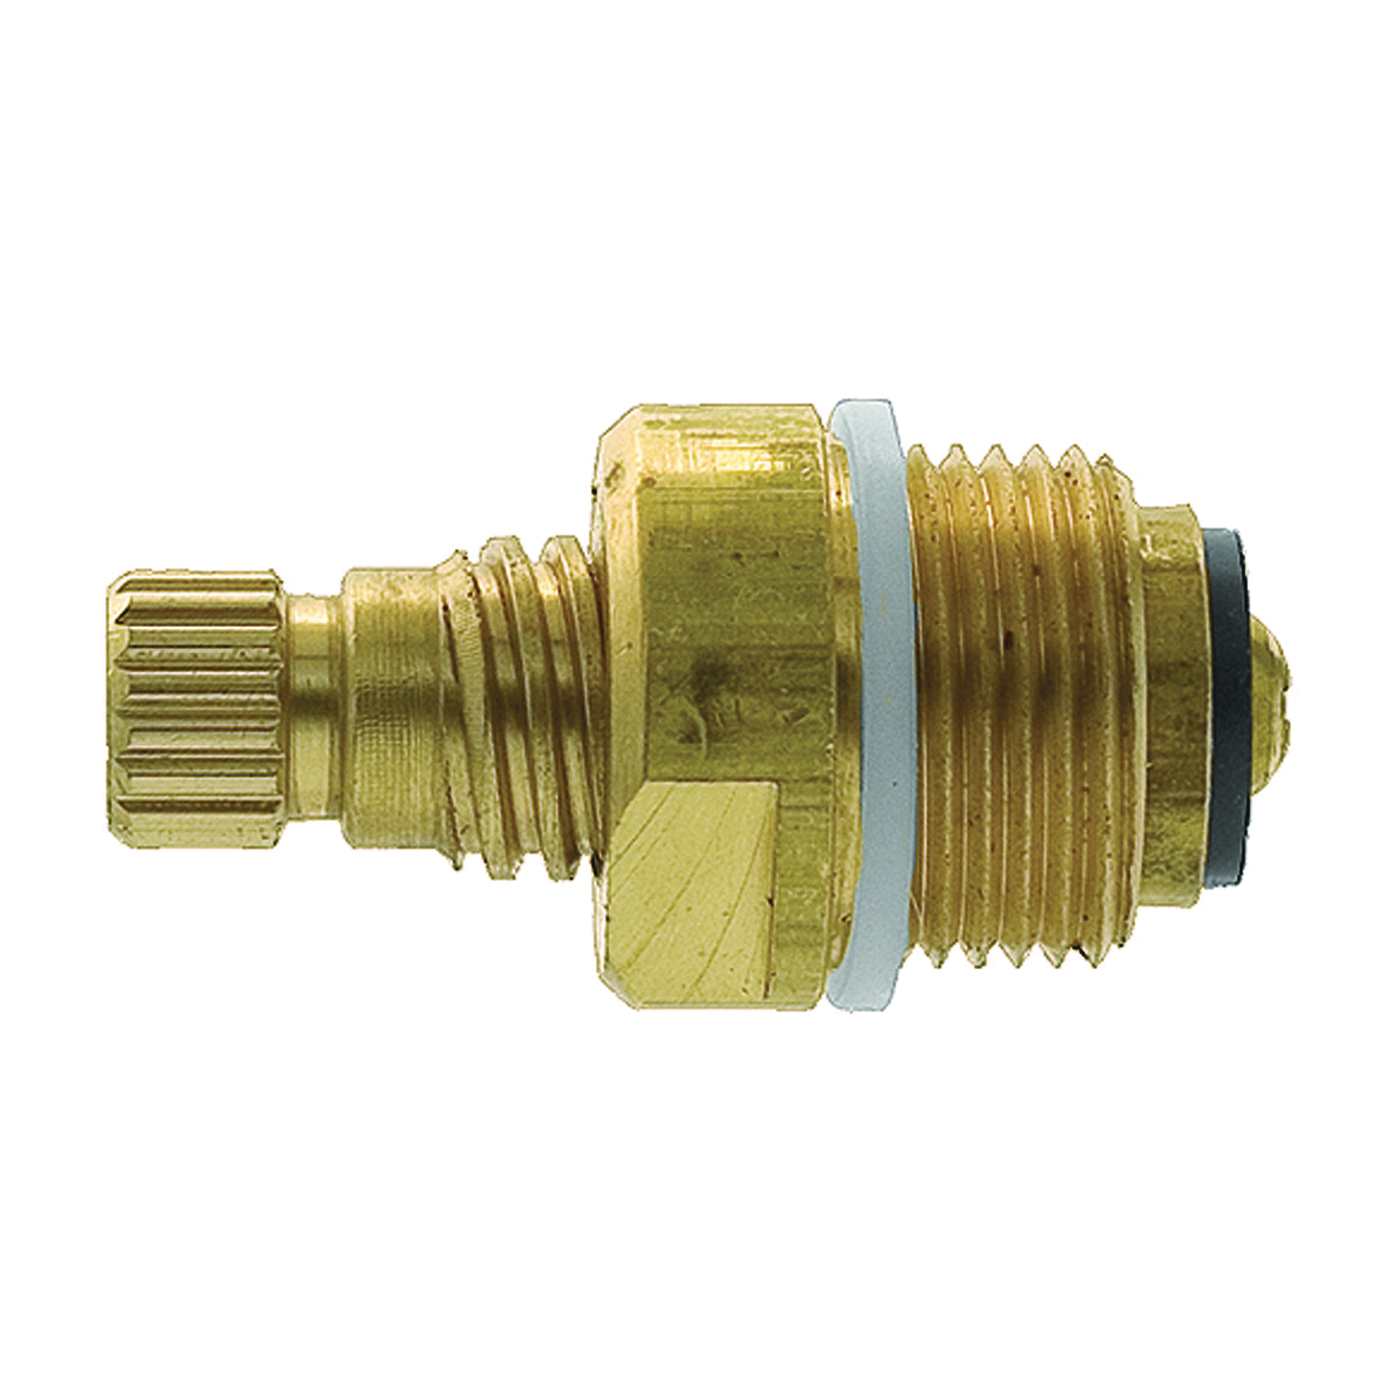 15918B Faucet Stem, Brass, 1-11/16 in L, For: Streamway Two Handle Bath Faucets